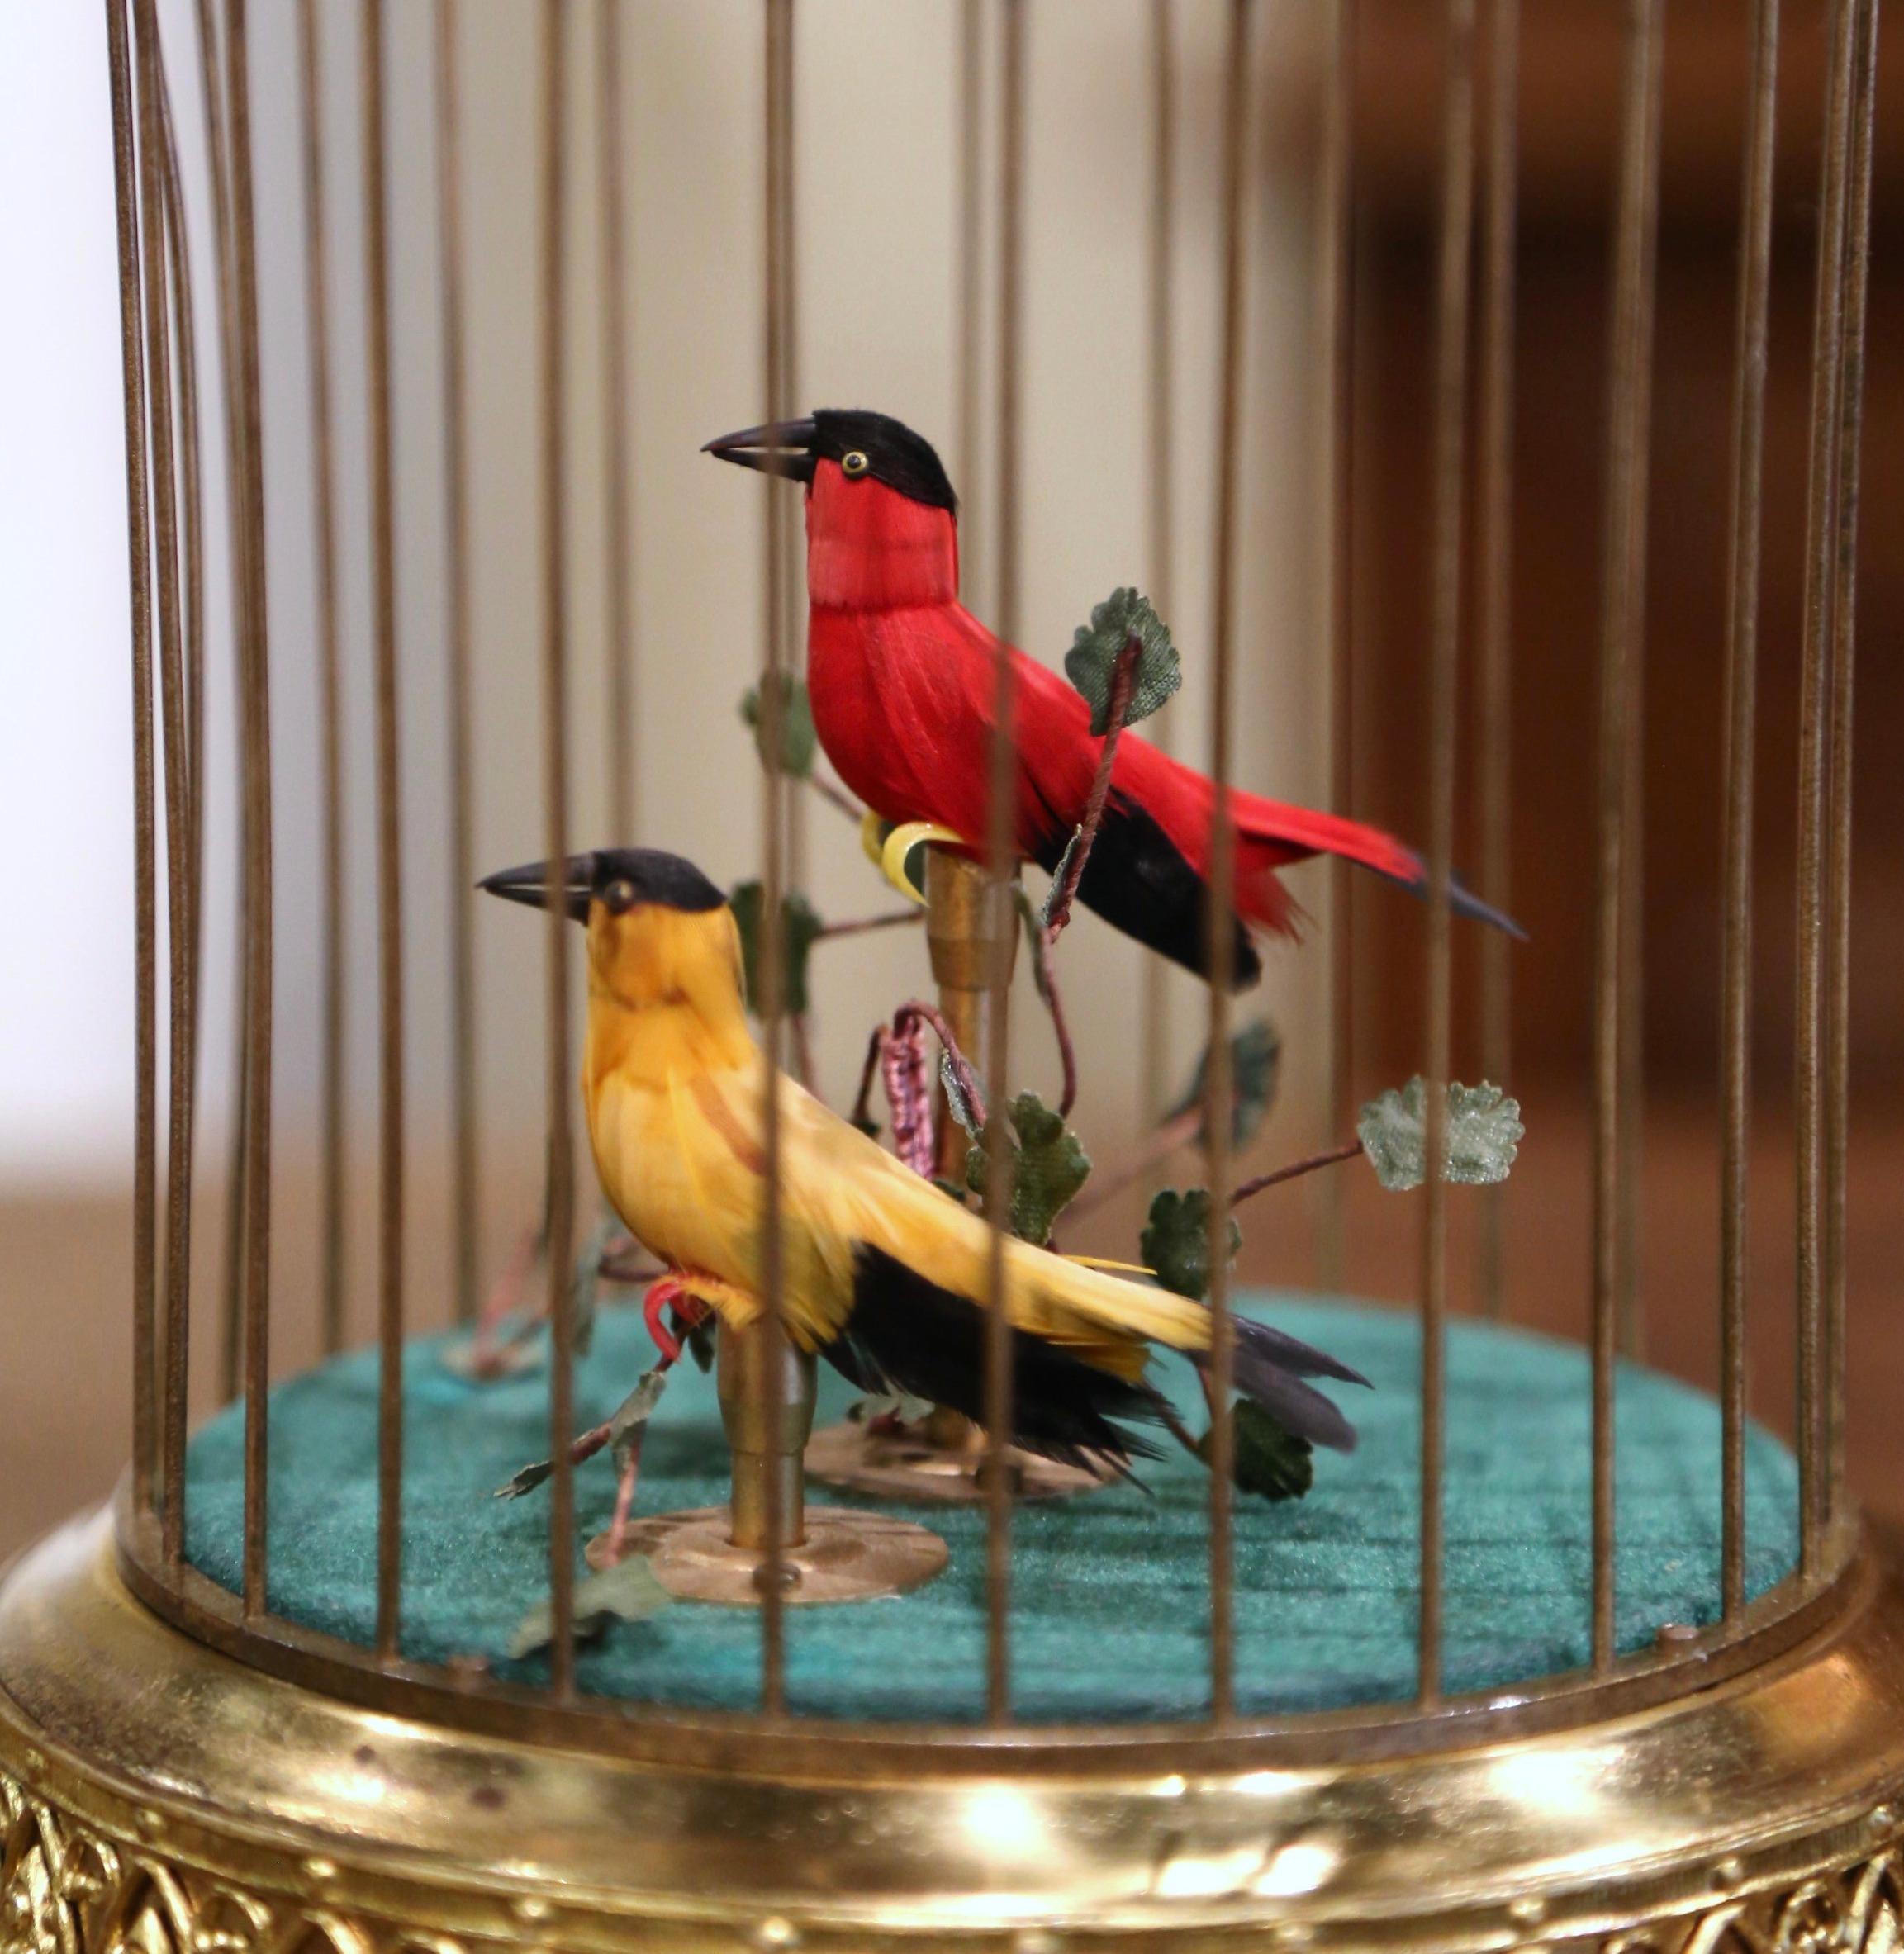 Hand-Crafted Late 20th Century Swiss Automaton Brass Cage with Two Moving Birds